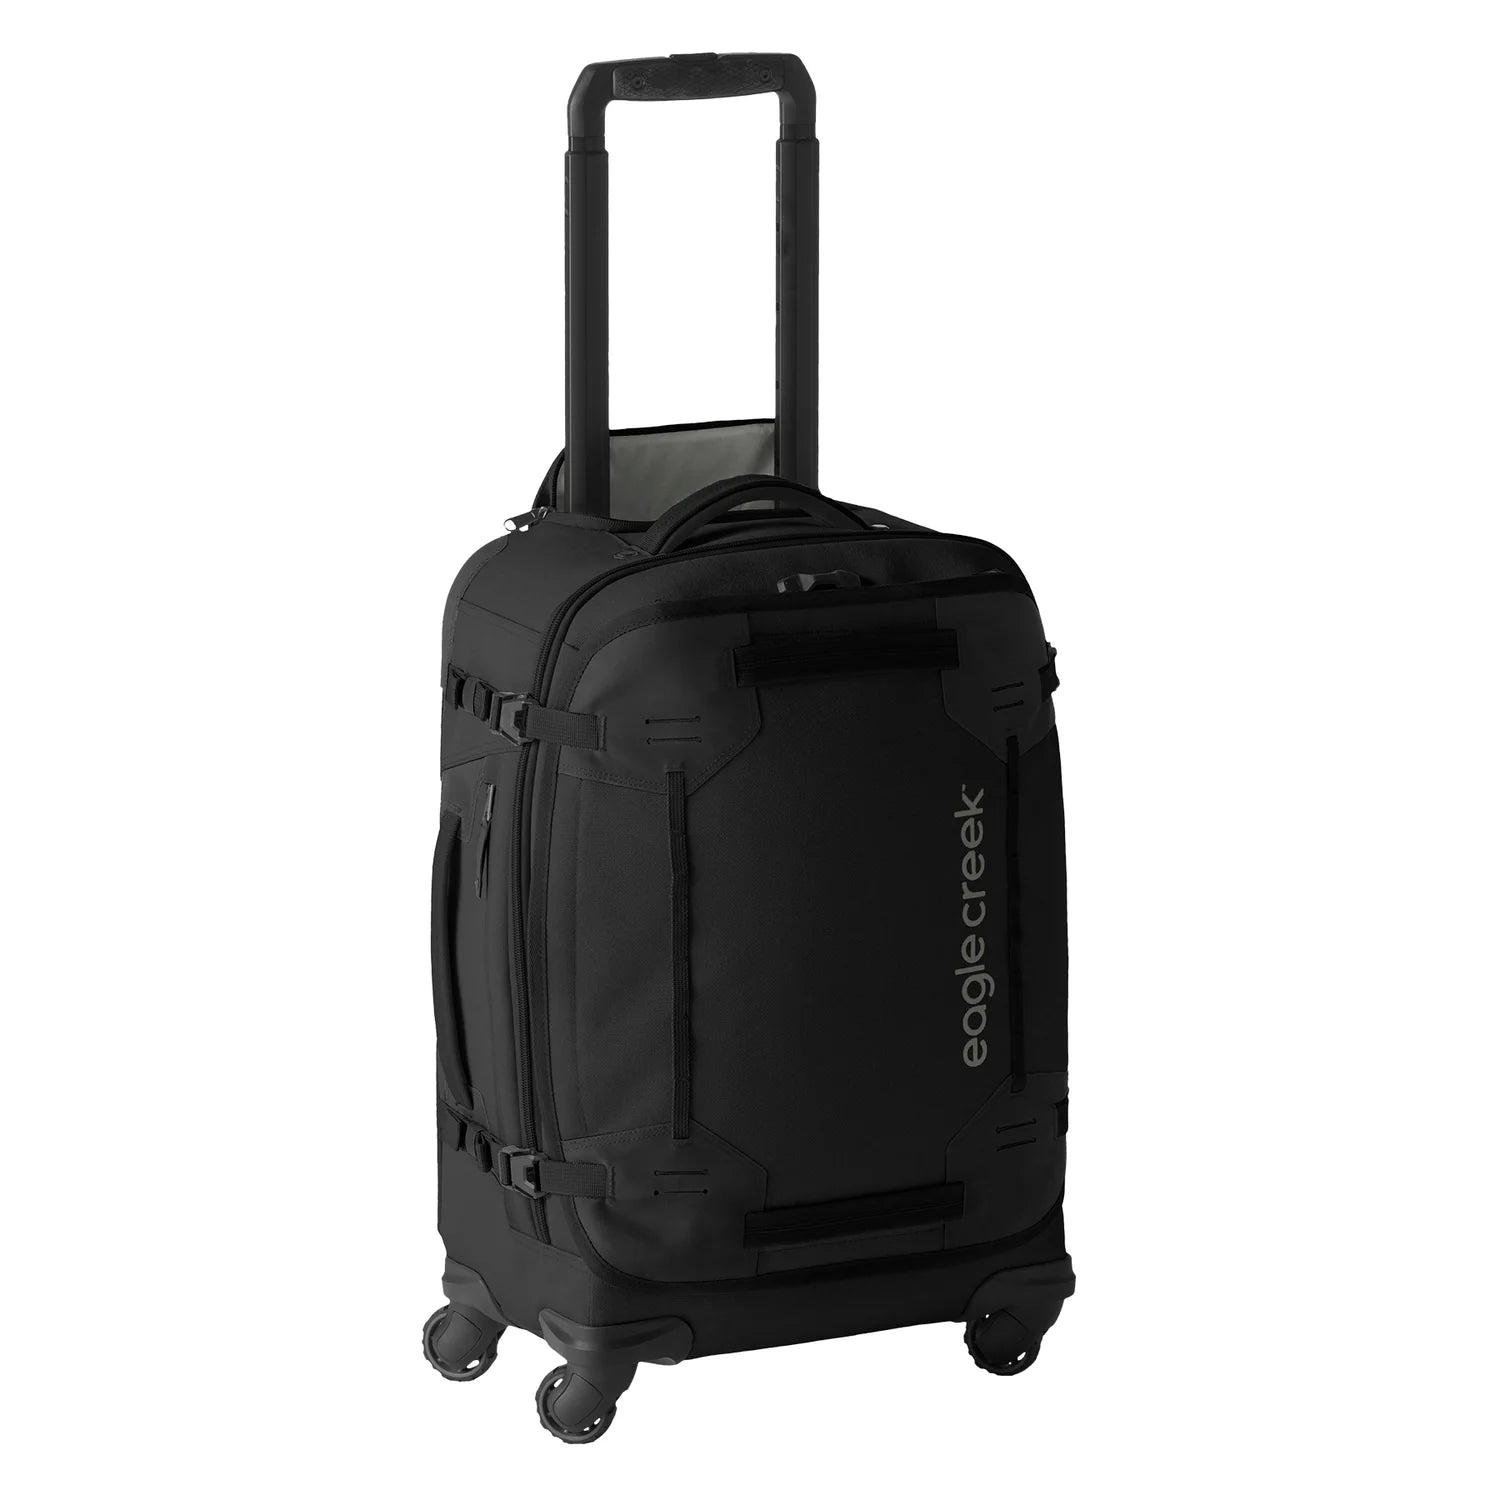 GEAR WARRIOR XE 4-WHEEL CARRY-ON LUGGAGE